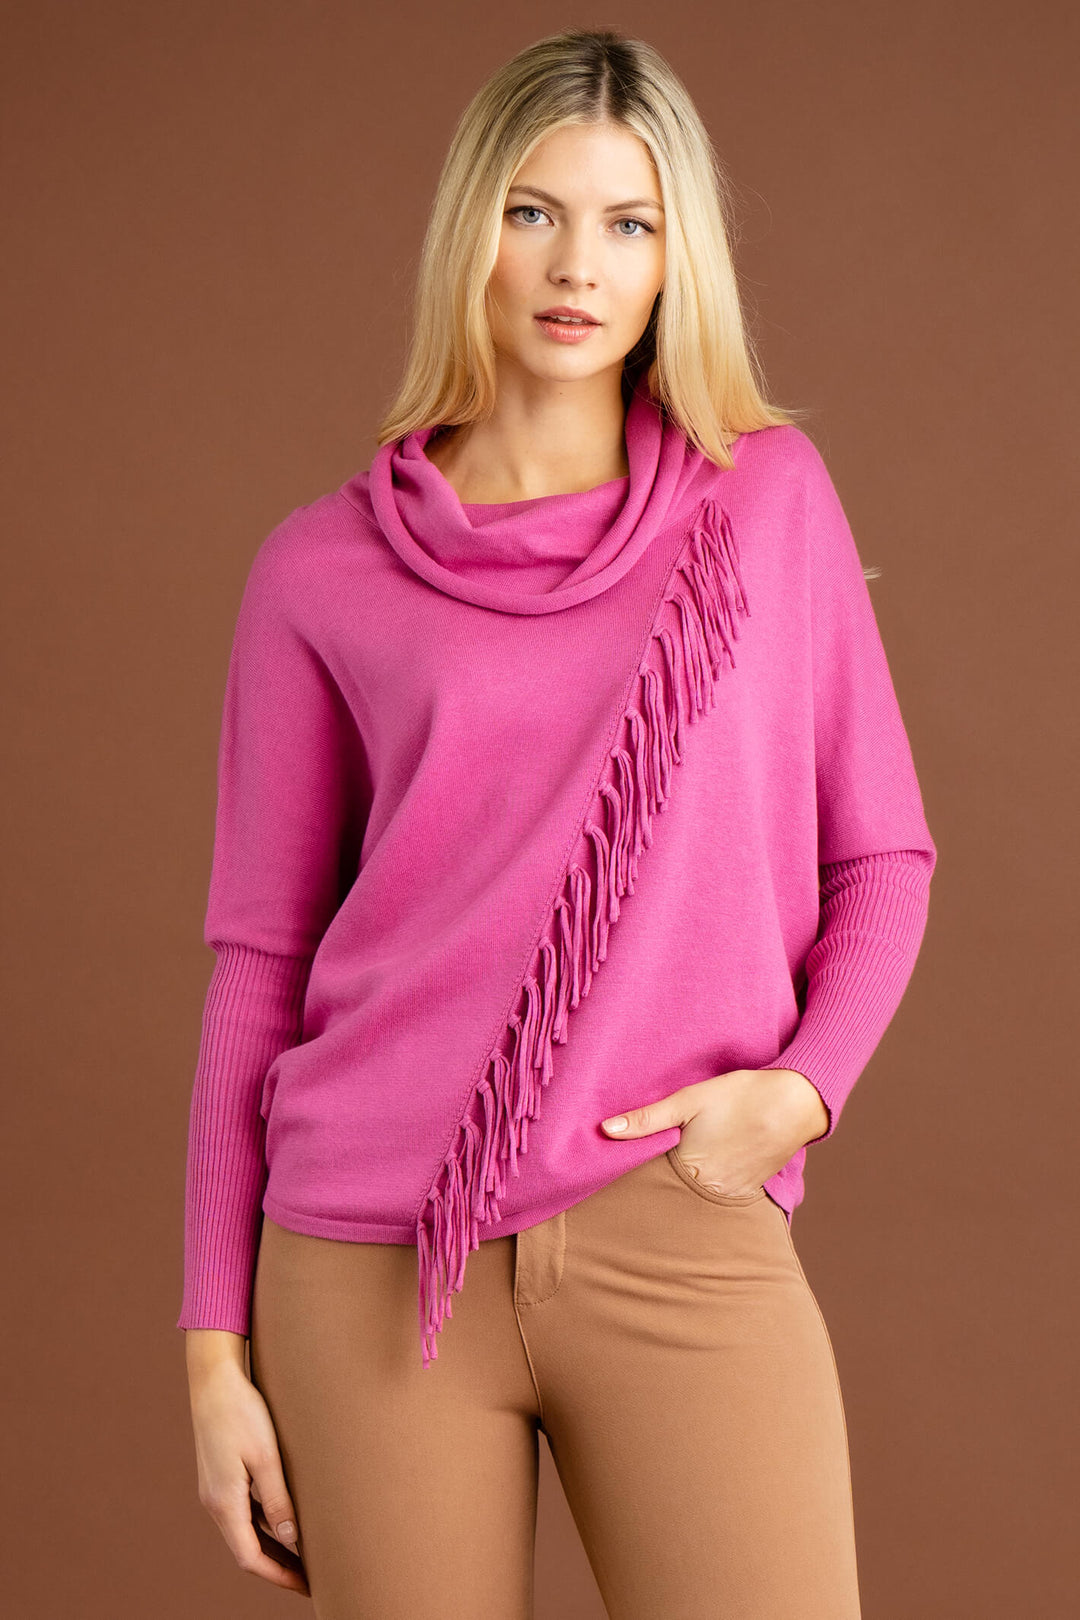 Marble Fashion 6373 206 Pink Oversized Cowl Neck Tassle Jumper - Experience Boutique